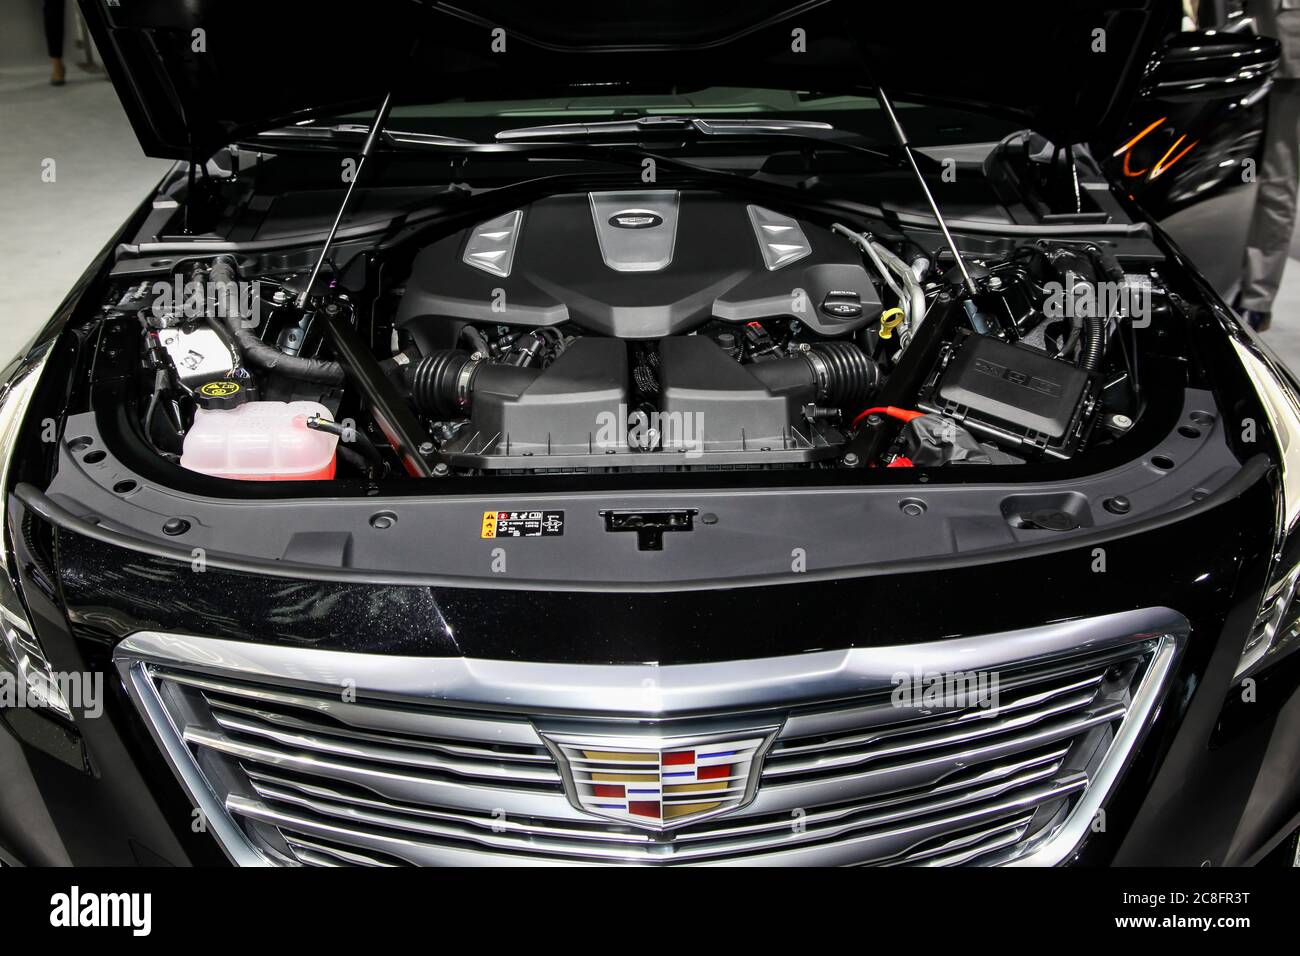 NEW YORK - March 23: A Cadillac CT6 engine hood open and exhibit at the 2016 New York International Auto Show during Press day Stock Photo